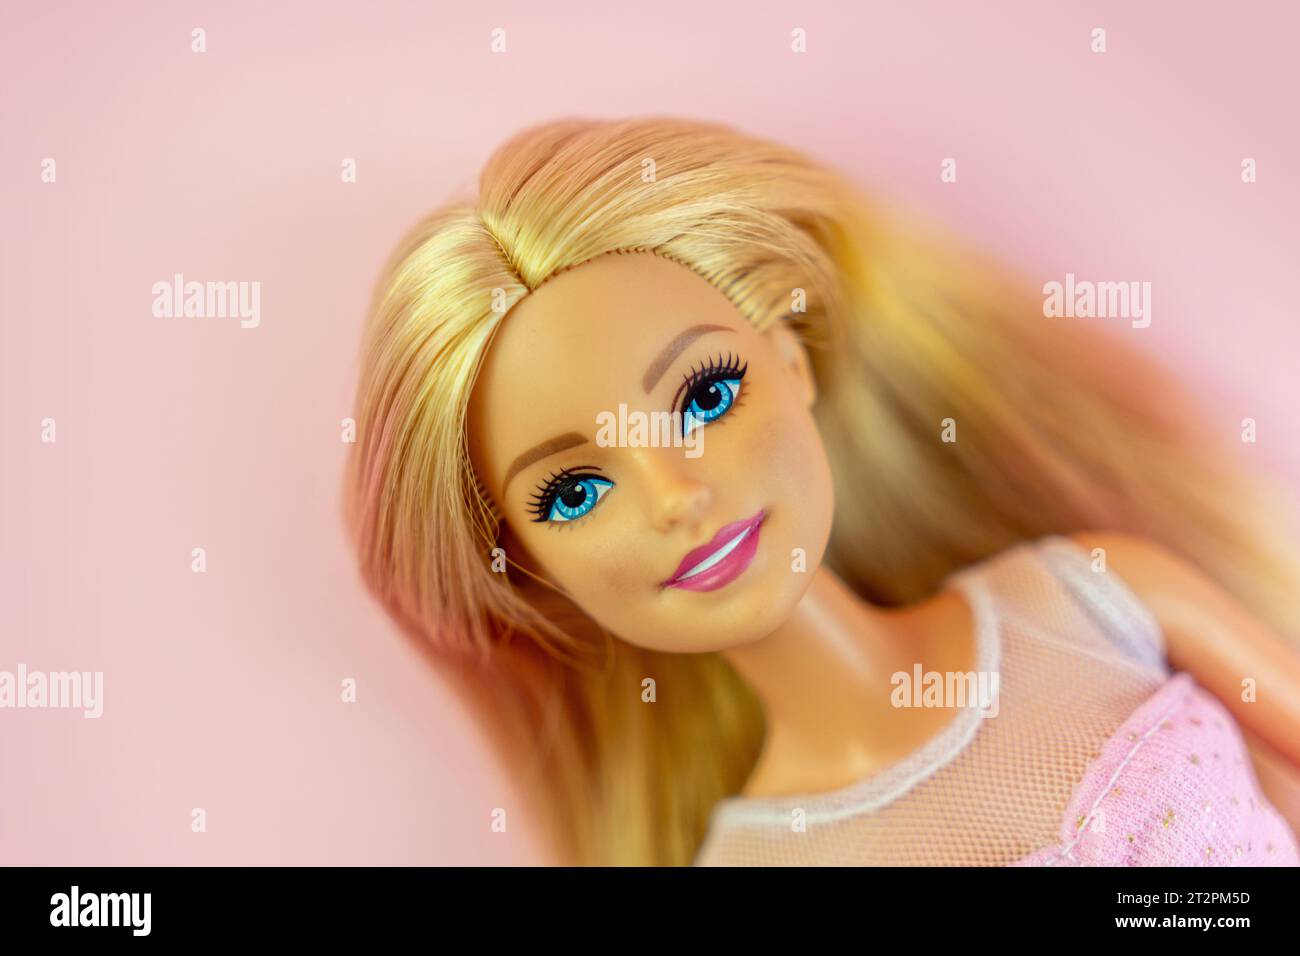 October 9, 2023. Barnaul, Russia: Portrait of a Barbie doll with loose blond hair on a pink background. Portrait of a Barbie. Stock Photo